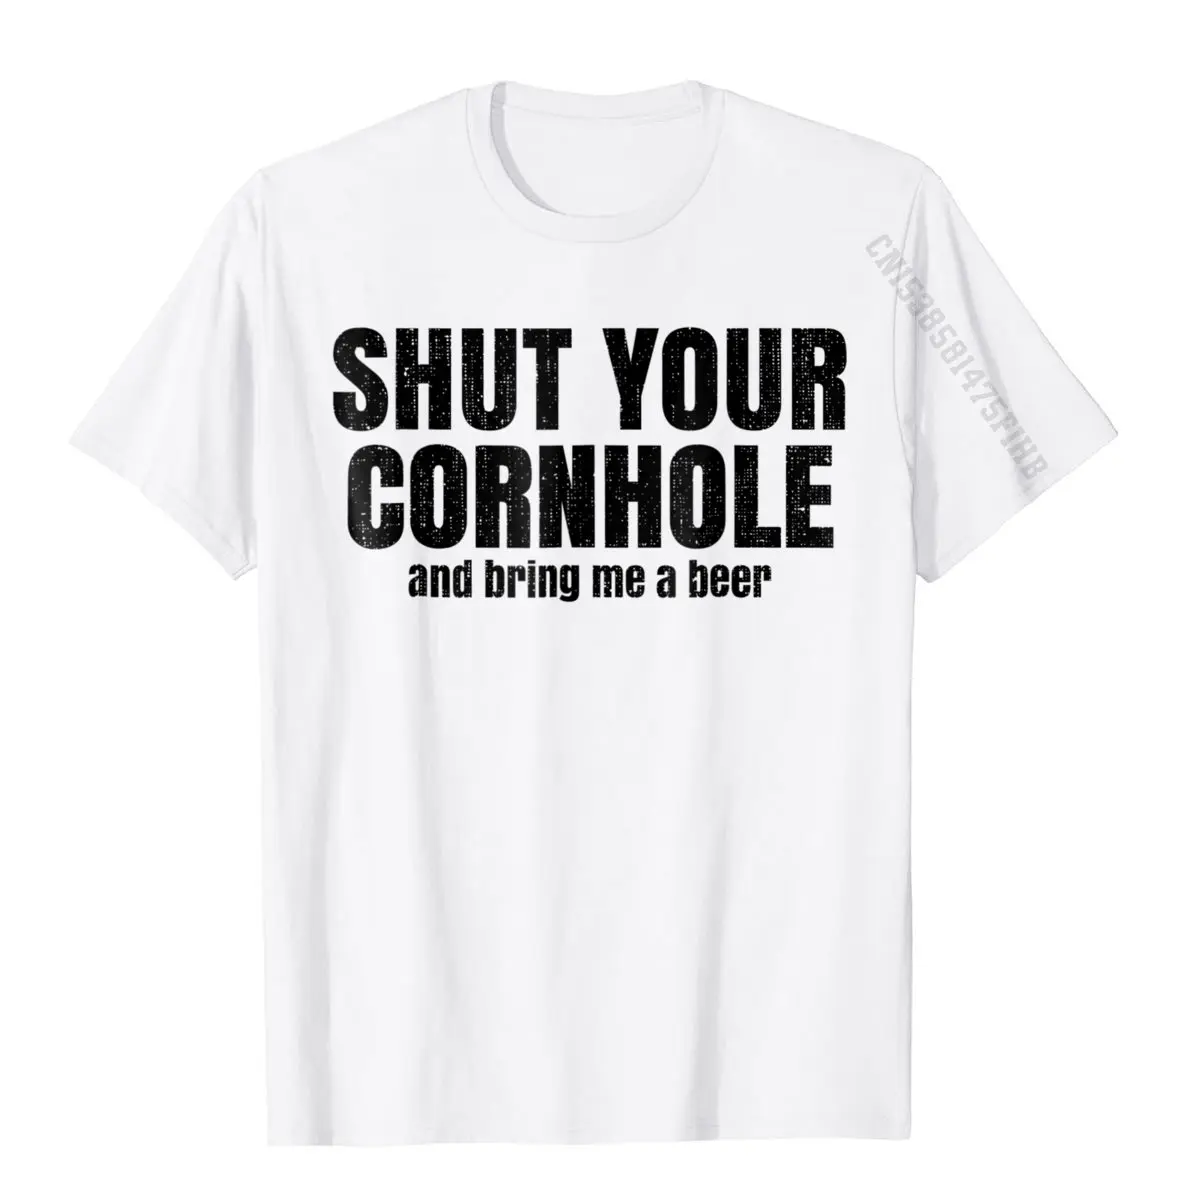 Funny Cornhole Shirt Shut Your Cornhole And Bring Me A Beer Fashionable Young T Shirt Leisure Tees Cotton Printing